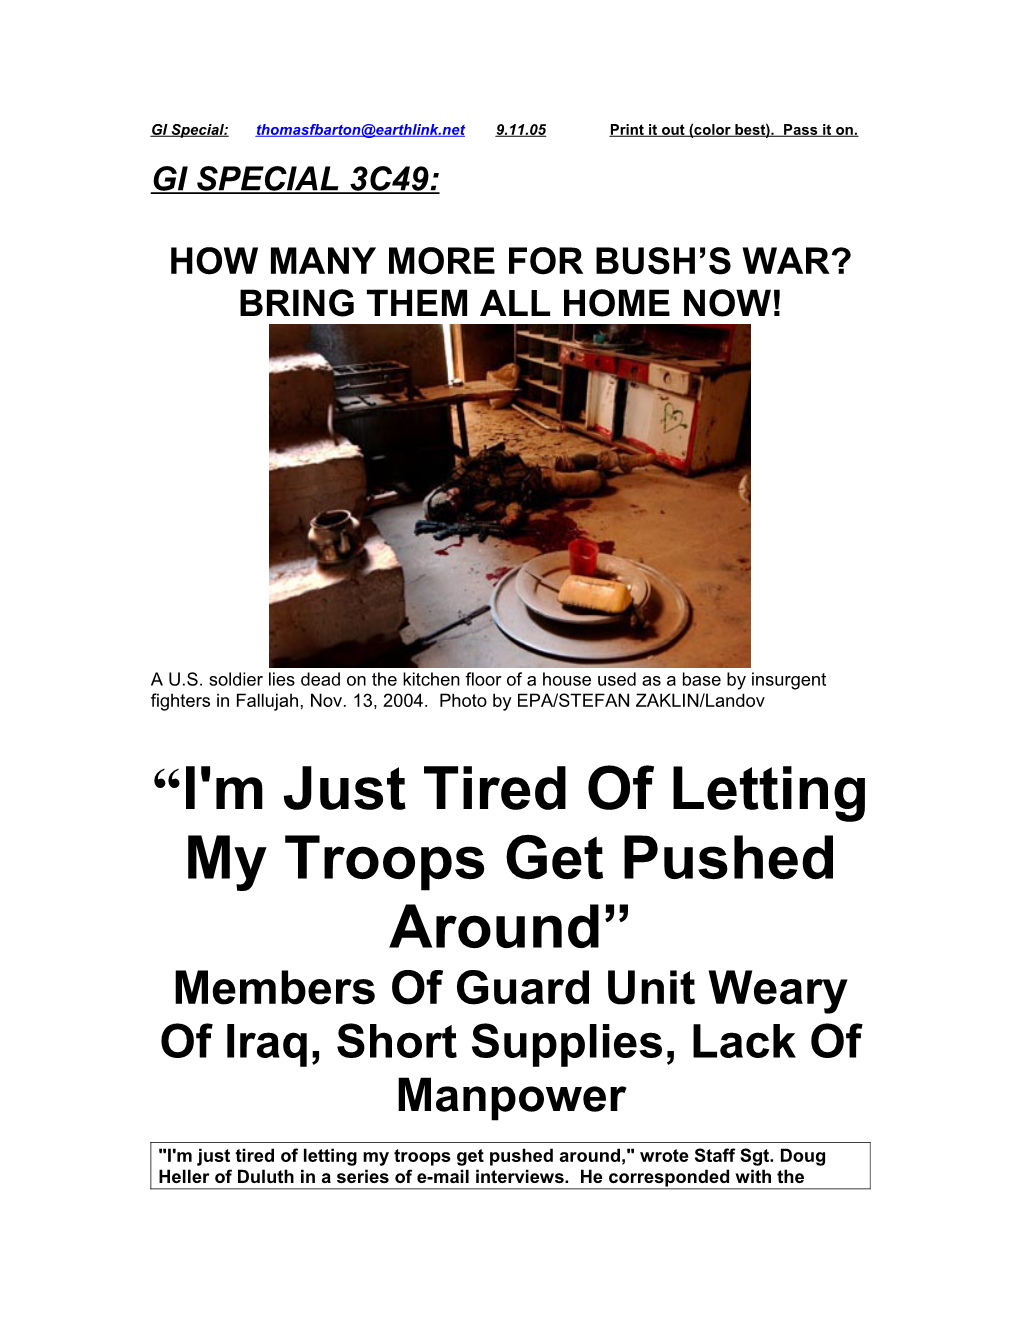 How Many More for Bush S War?